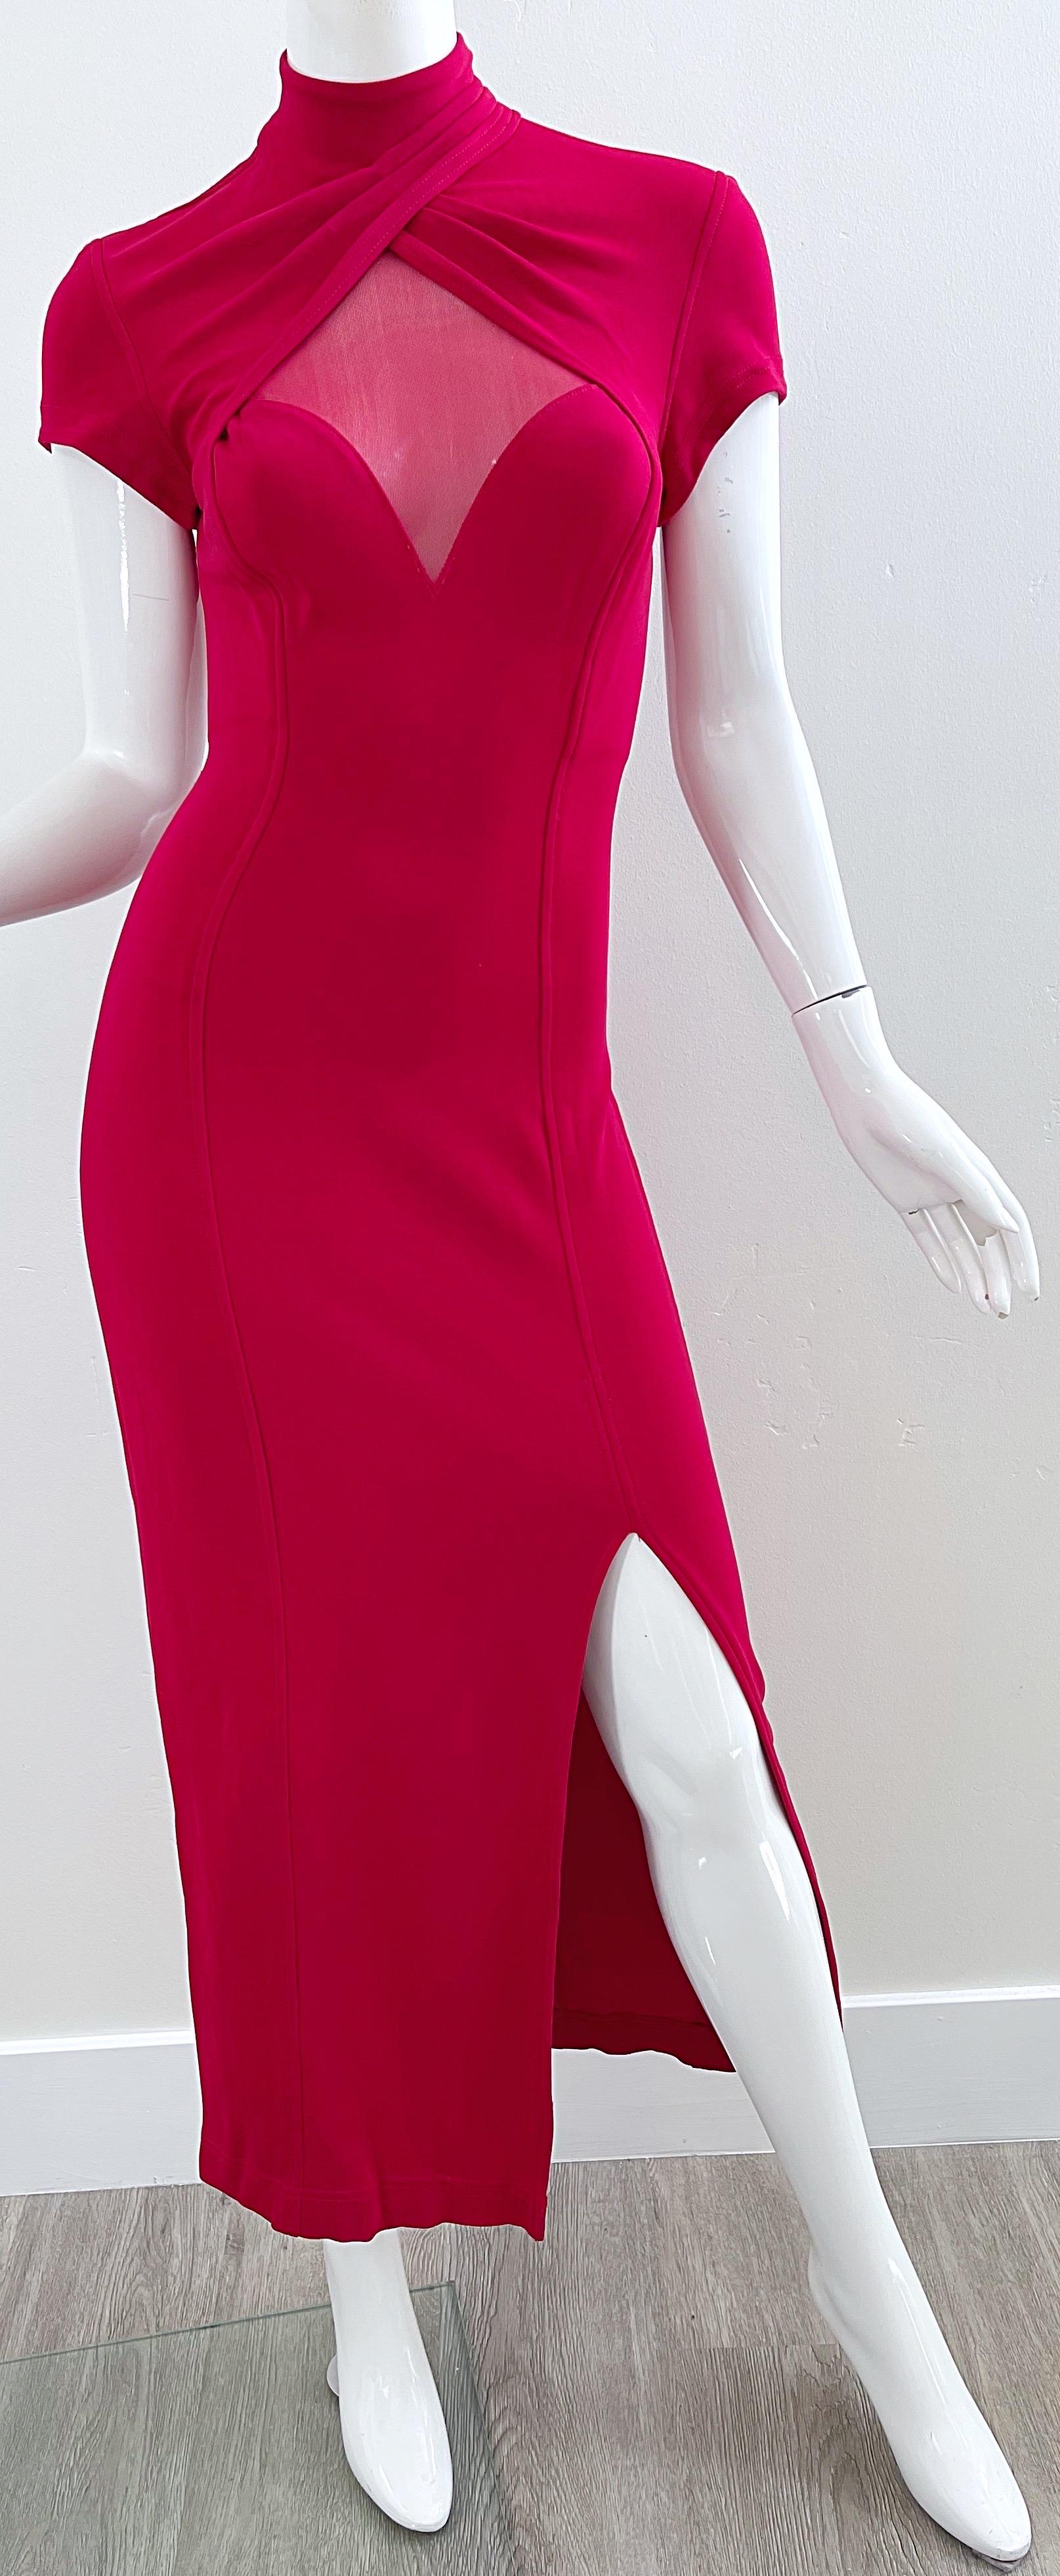 Women's 1990s Tadashi Lipstick Red Sexy Cut-Out Bodycon Vintage 90s Jersey Evening Dress For Sale